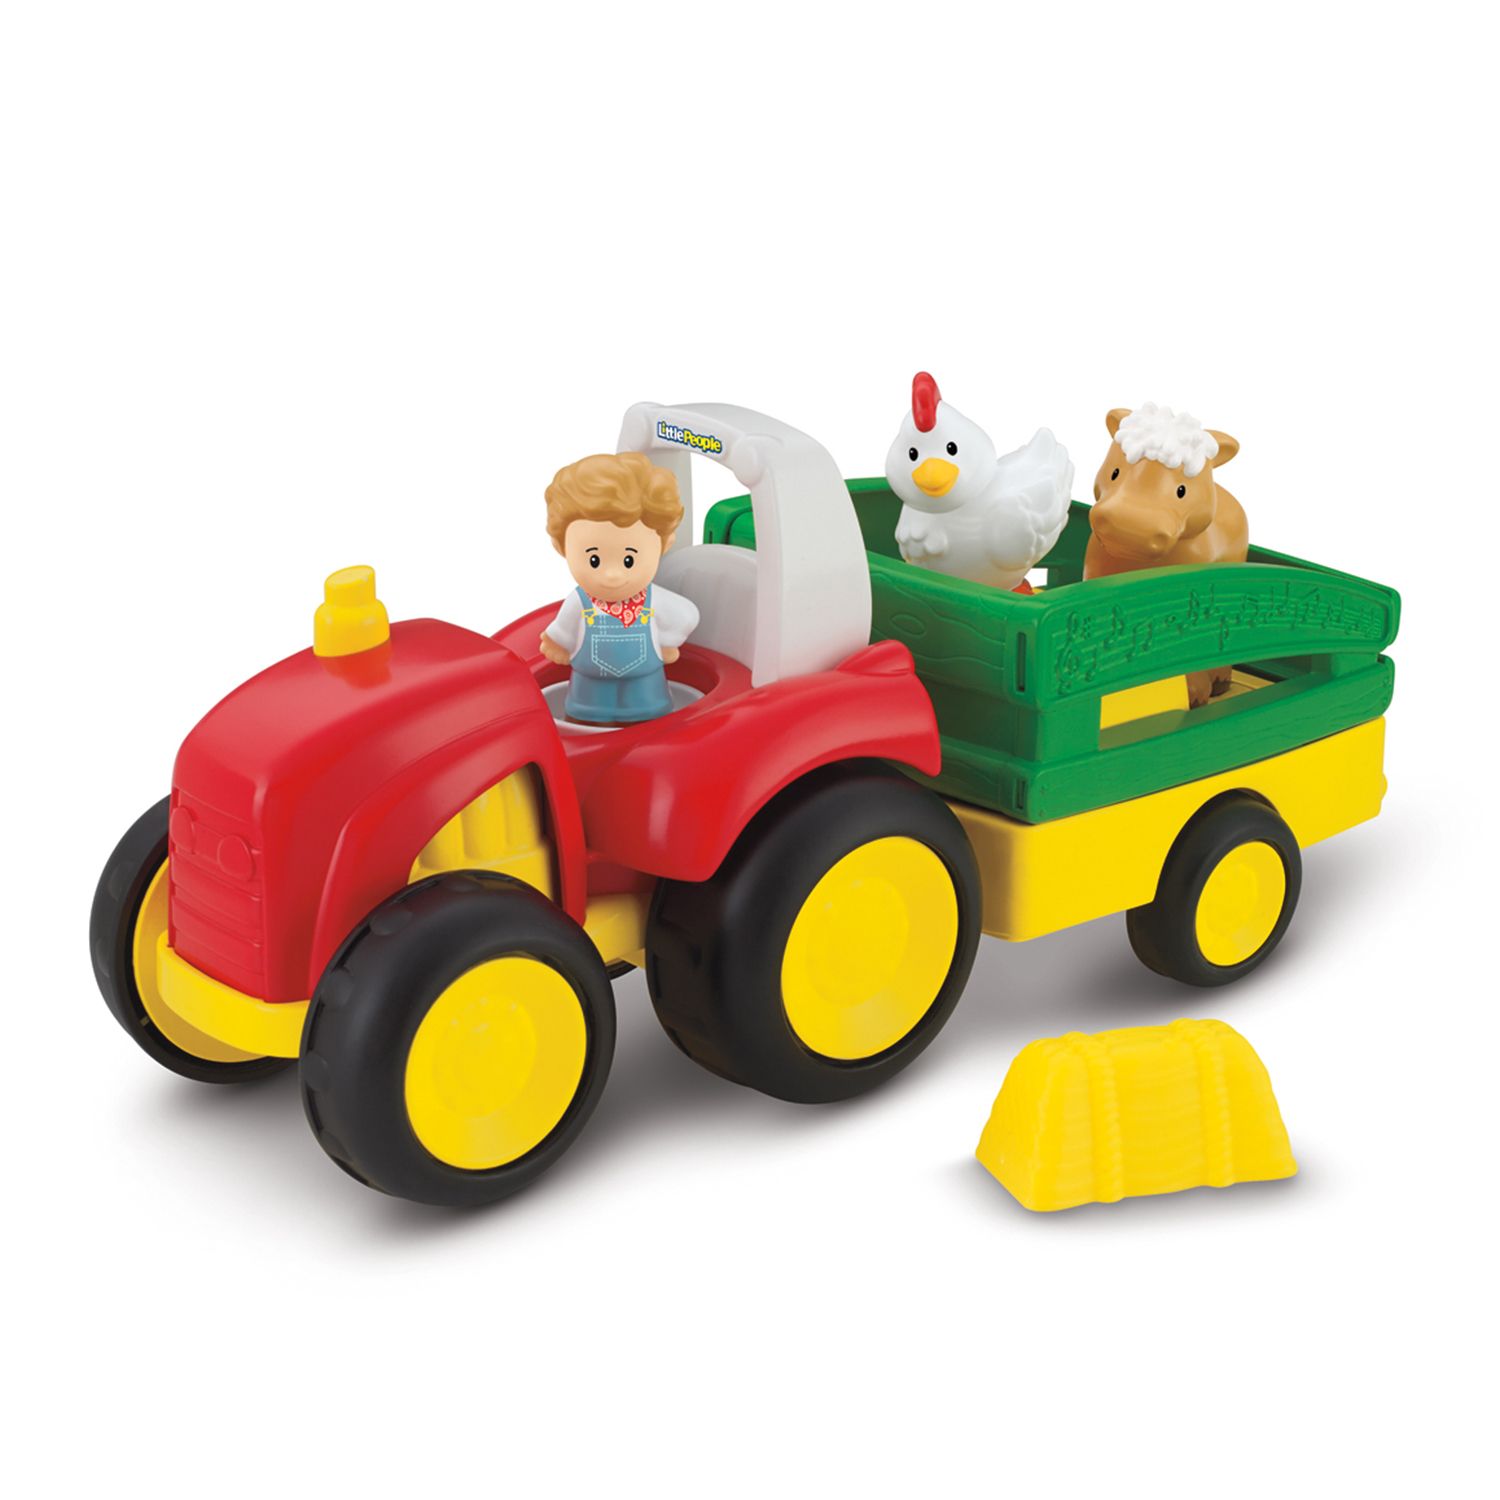 Little People Tow 'n Pull Tractor